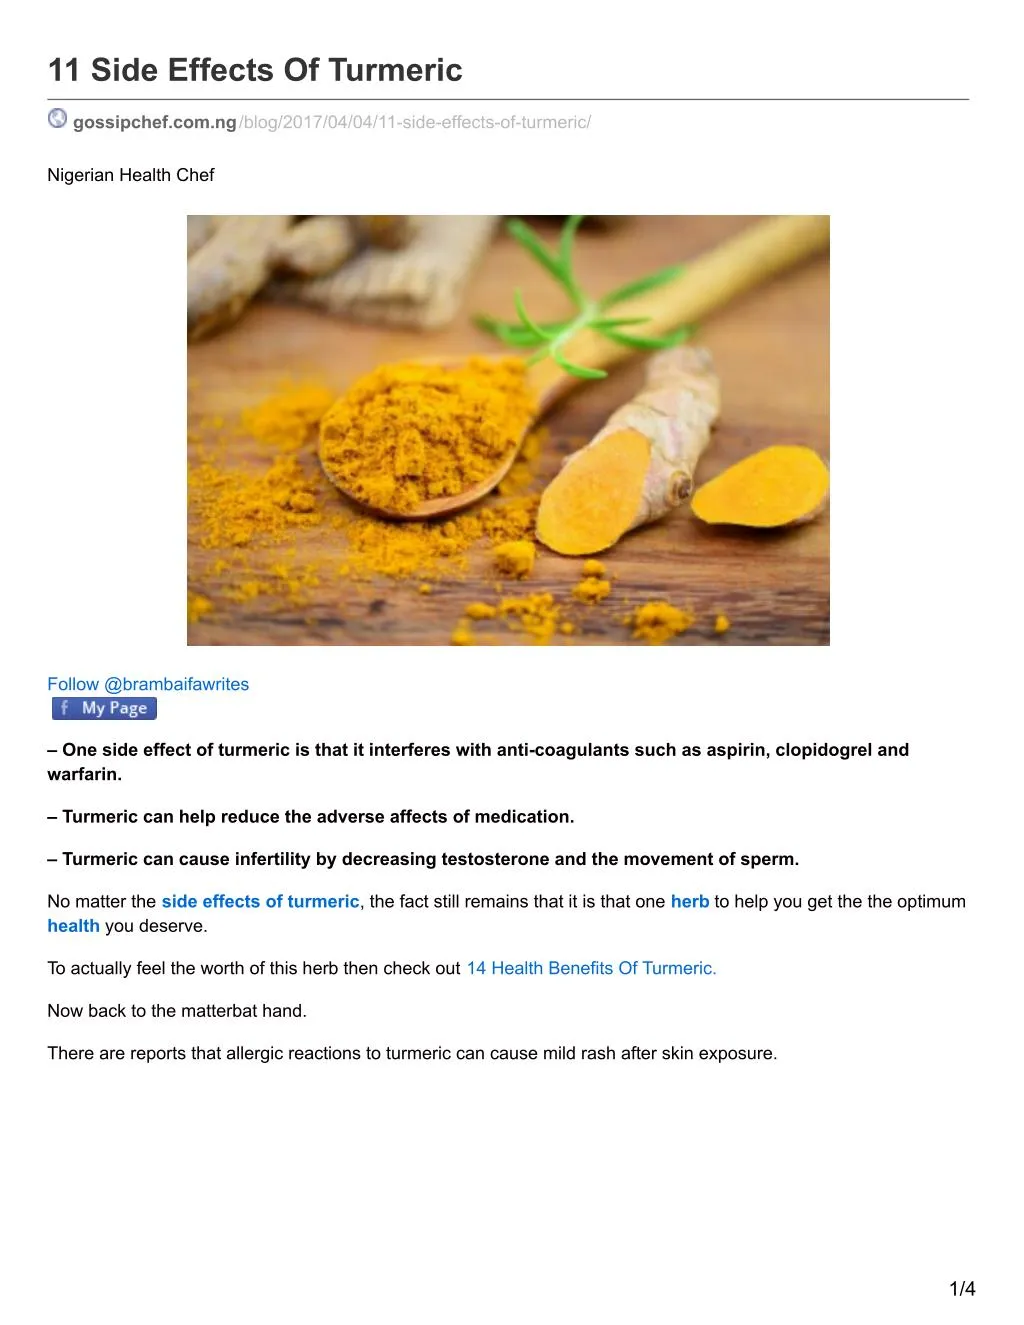 11 side effects of turmeric